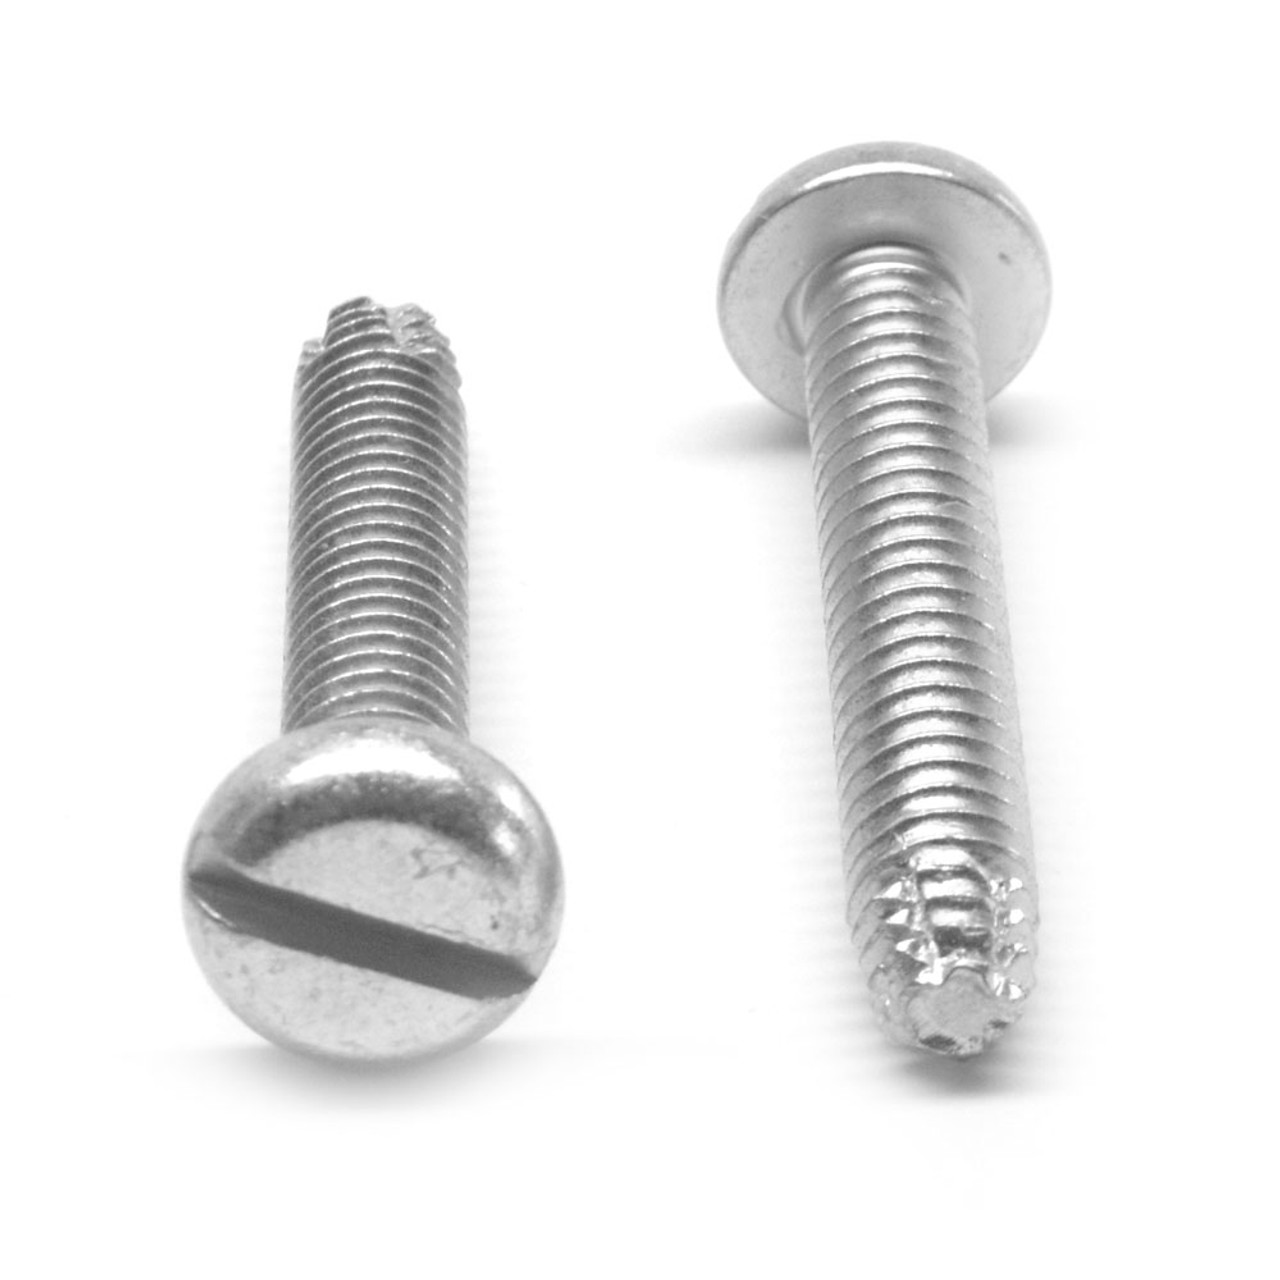 #4-40 x 3/16" (FT) Coarse Thread Thread Cutting Screw Slotted Pan Head Type F Low Carbon Steel Zinc Plated